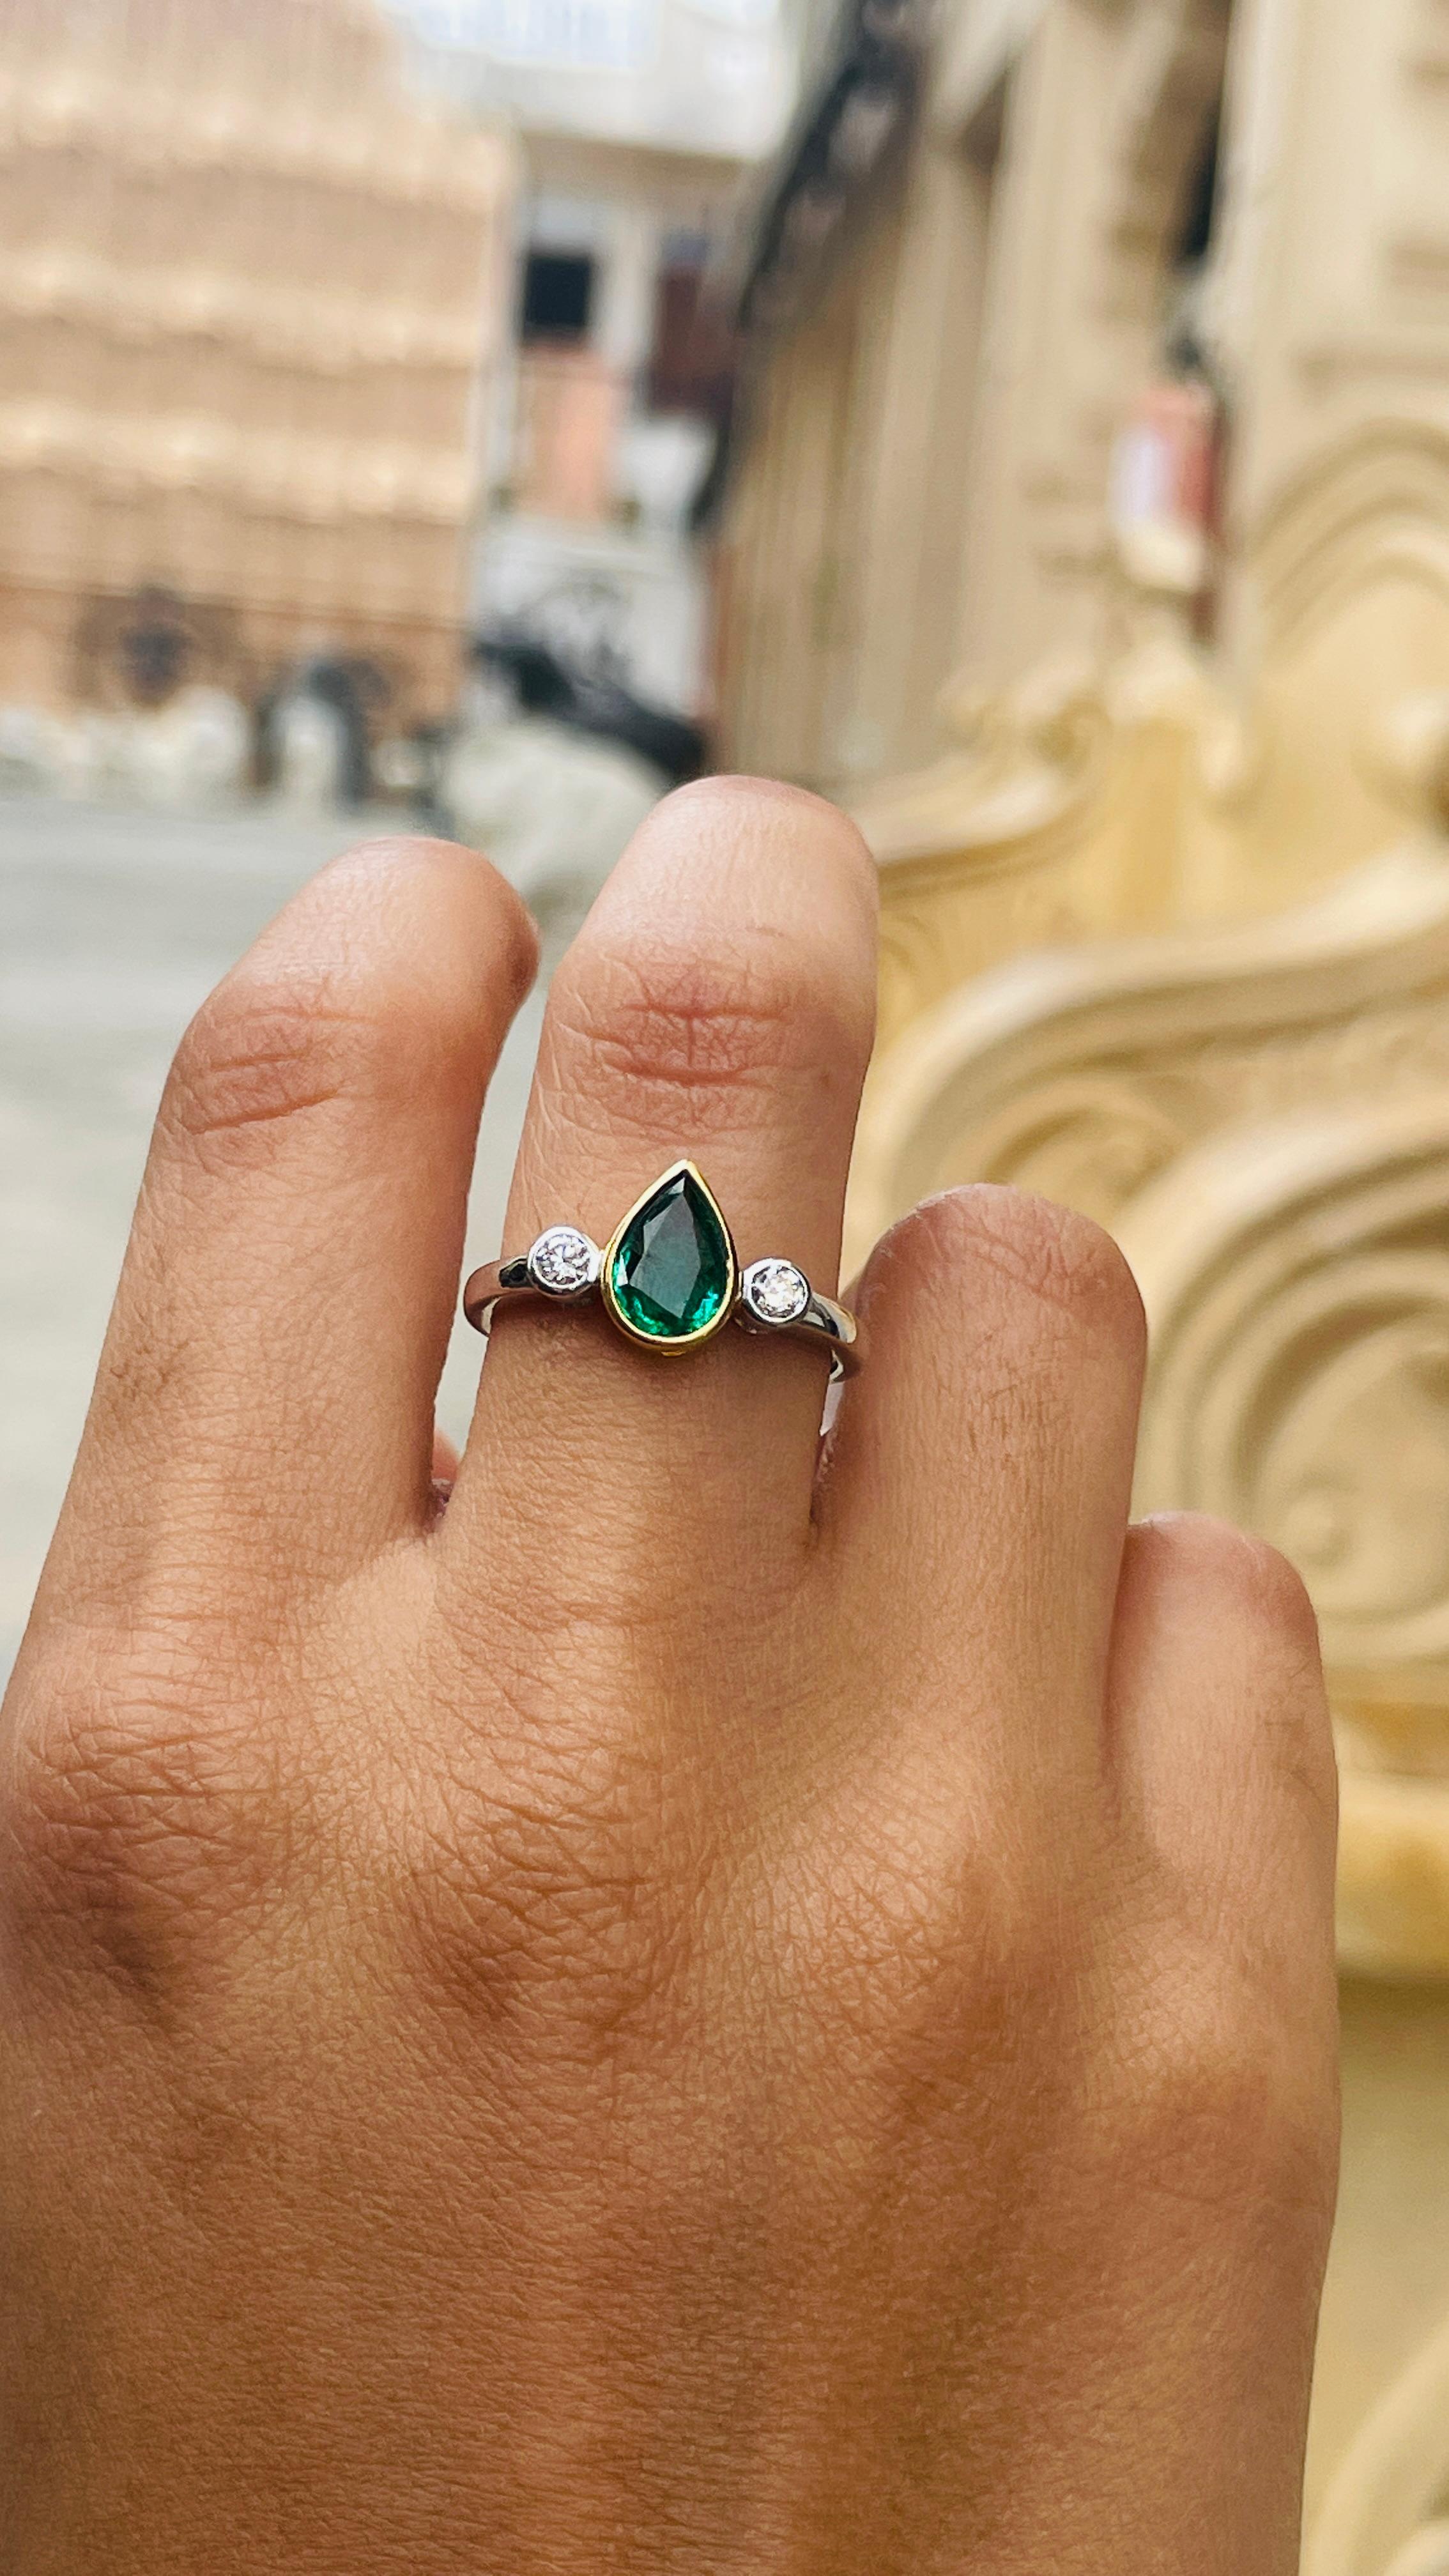 For Sale:  1.15 Carat Pear Shaped Emerald and Diamond Engagement Ring in 18k White Gold  11